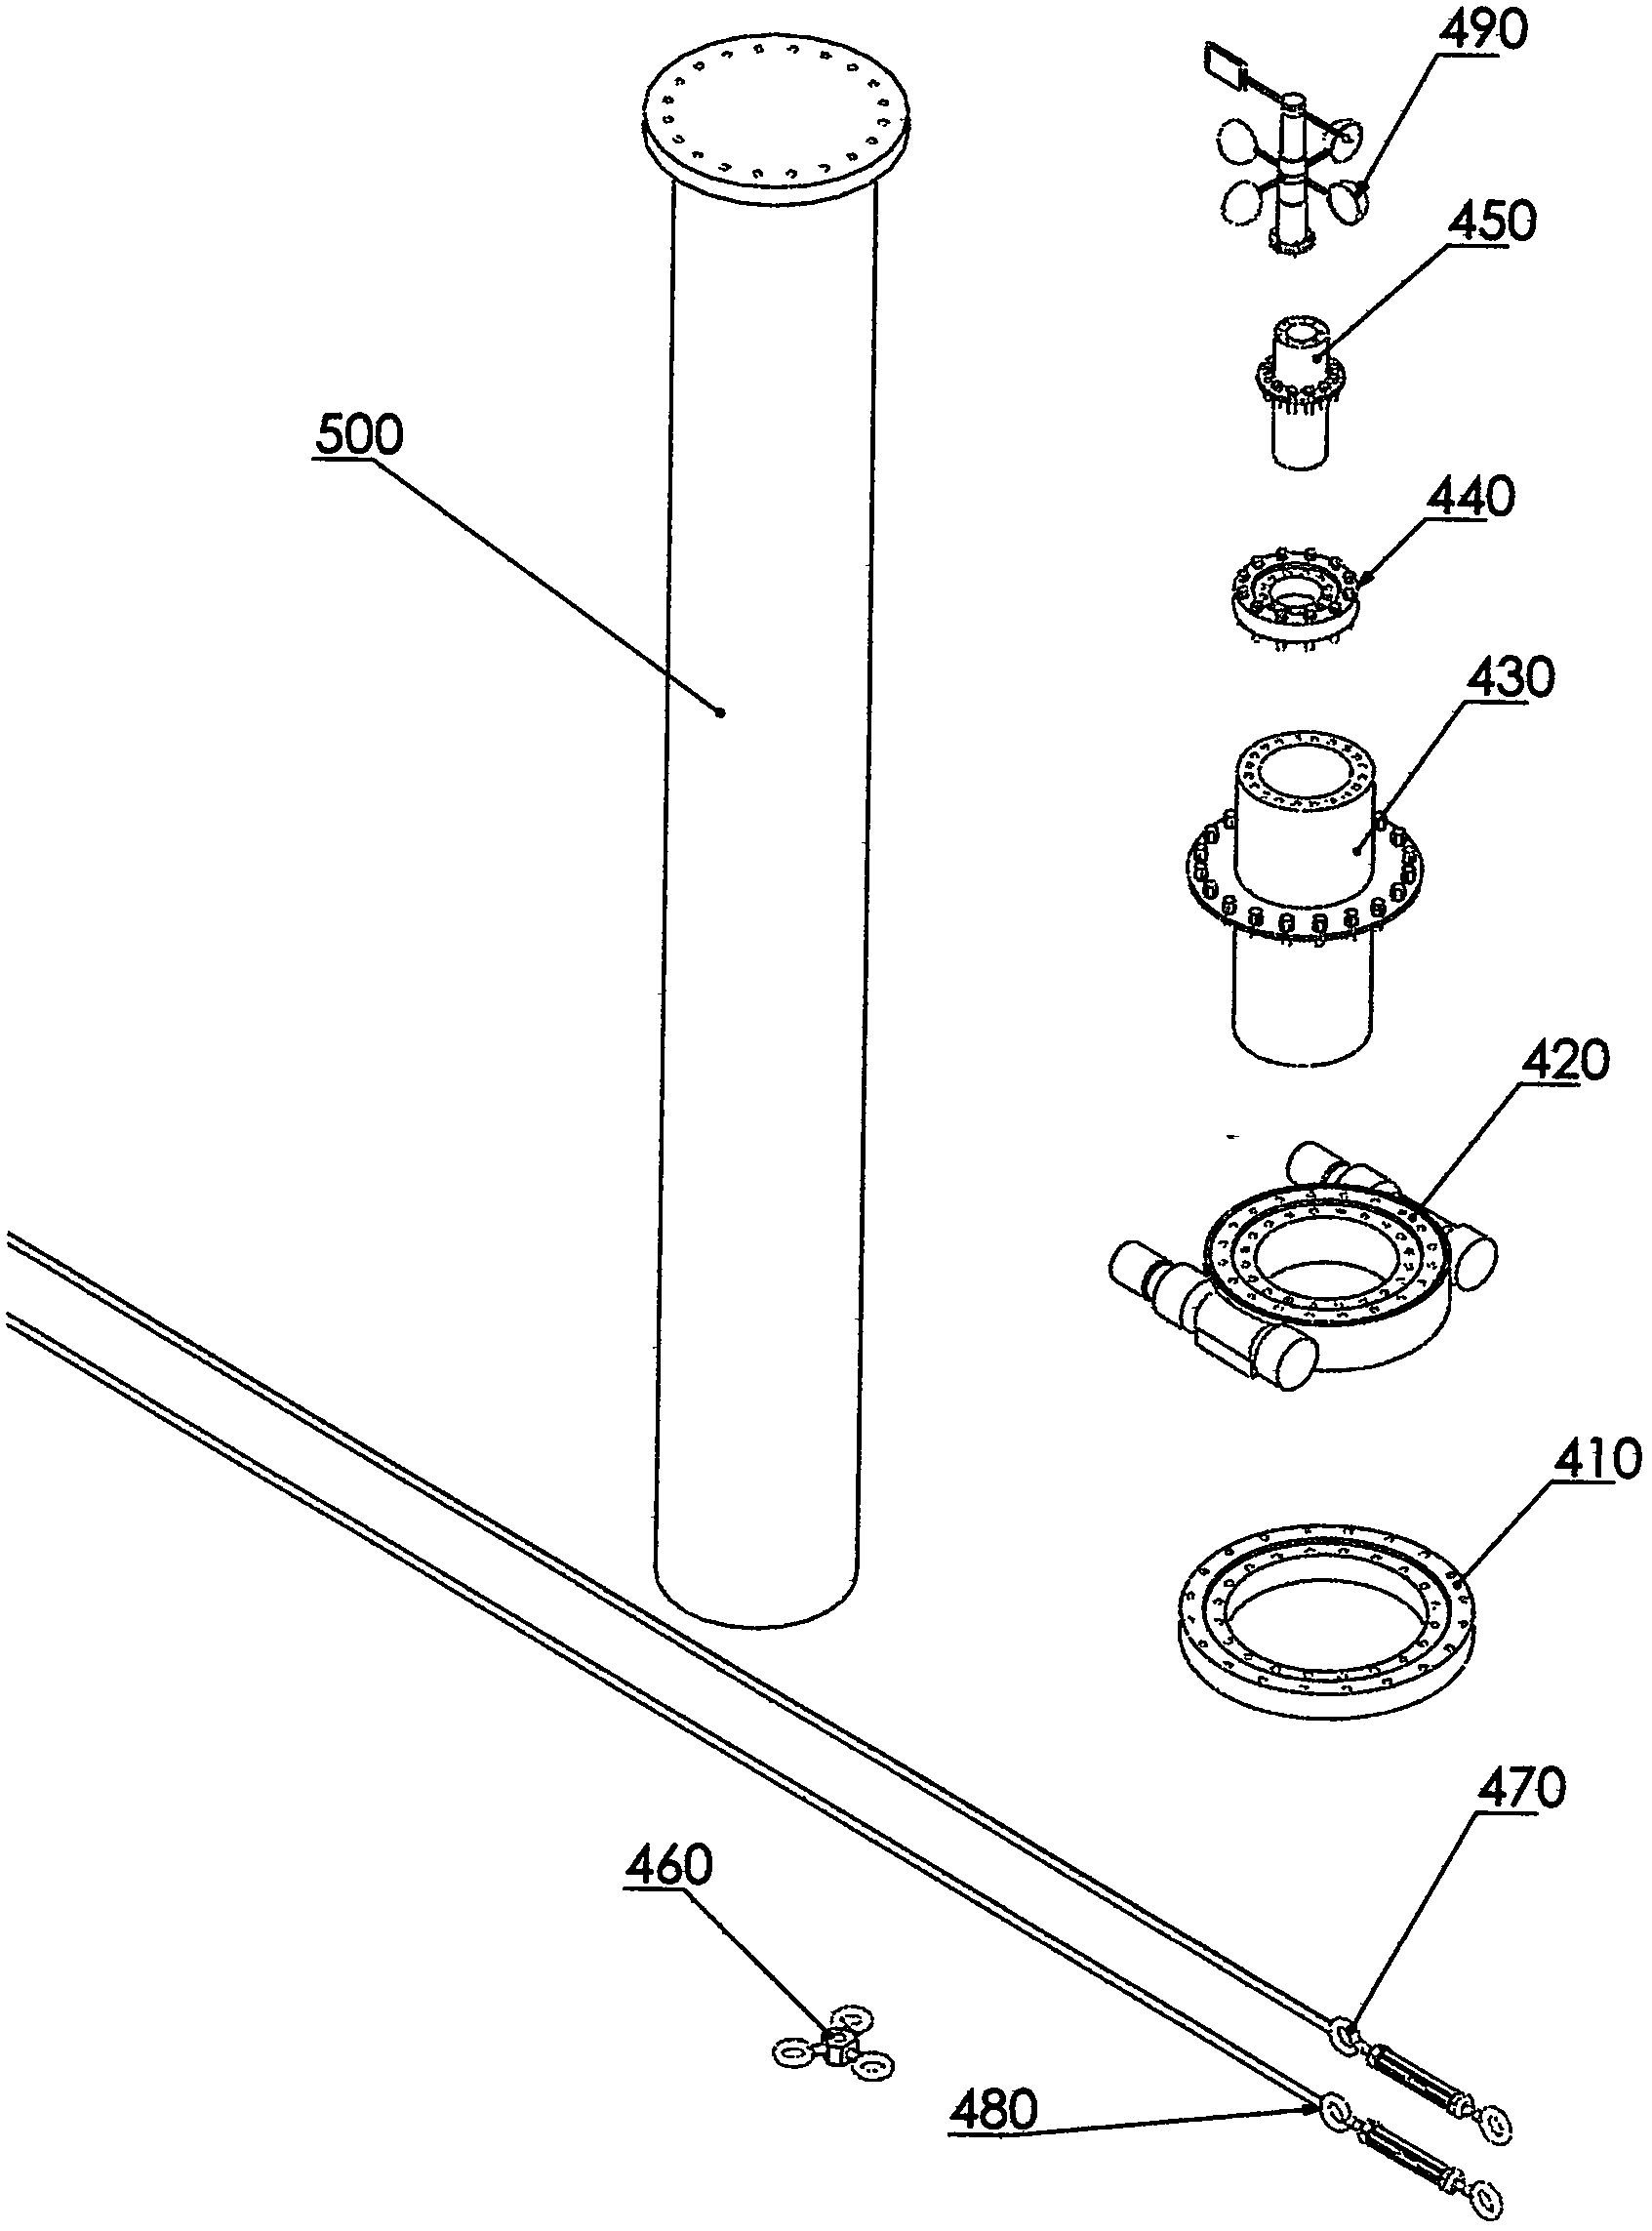 Trunk-free rotary table type vertical-axis wind turbine